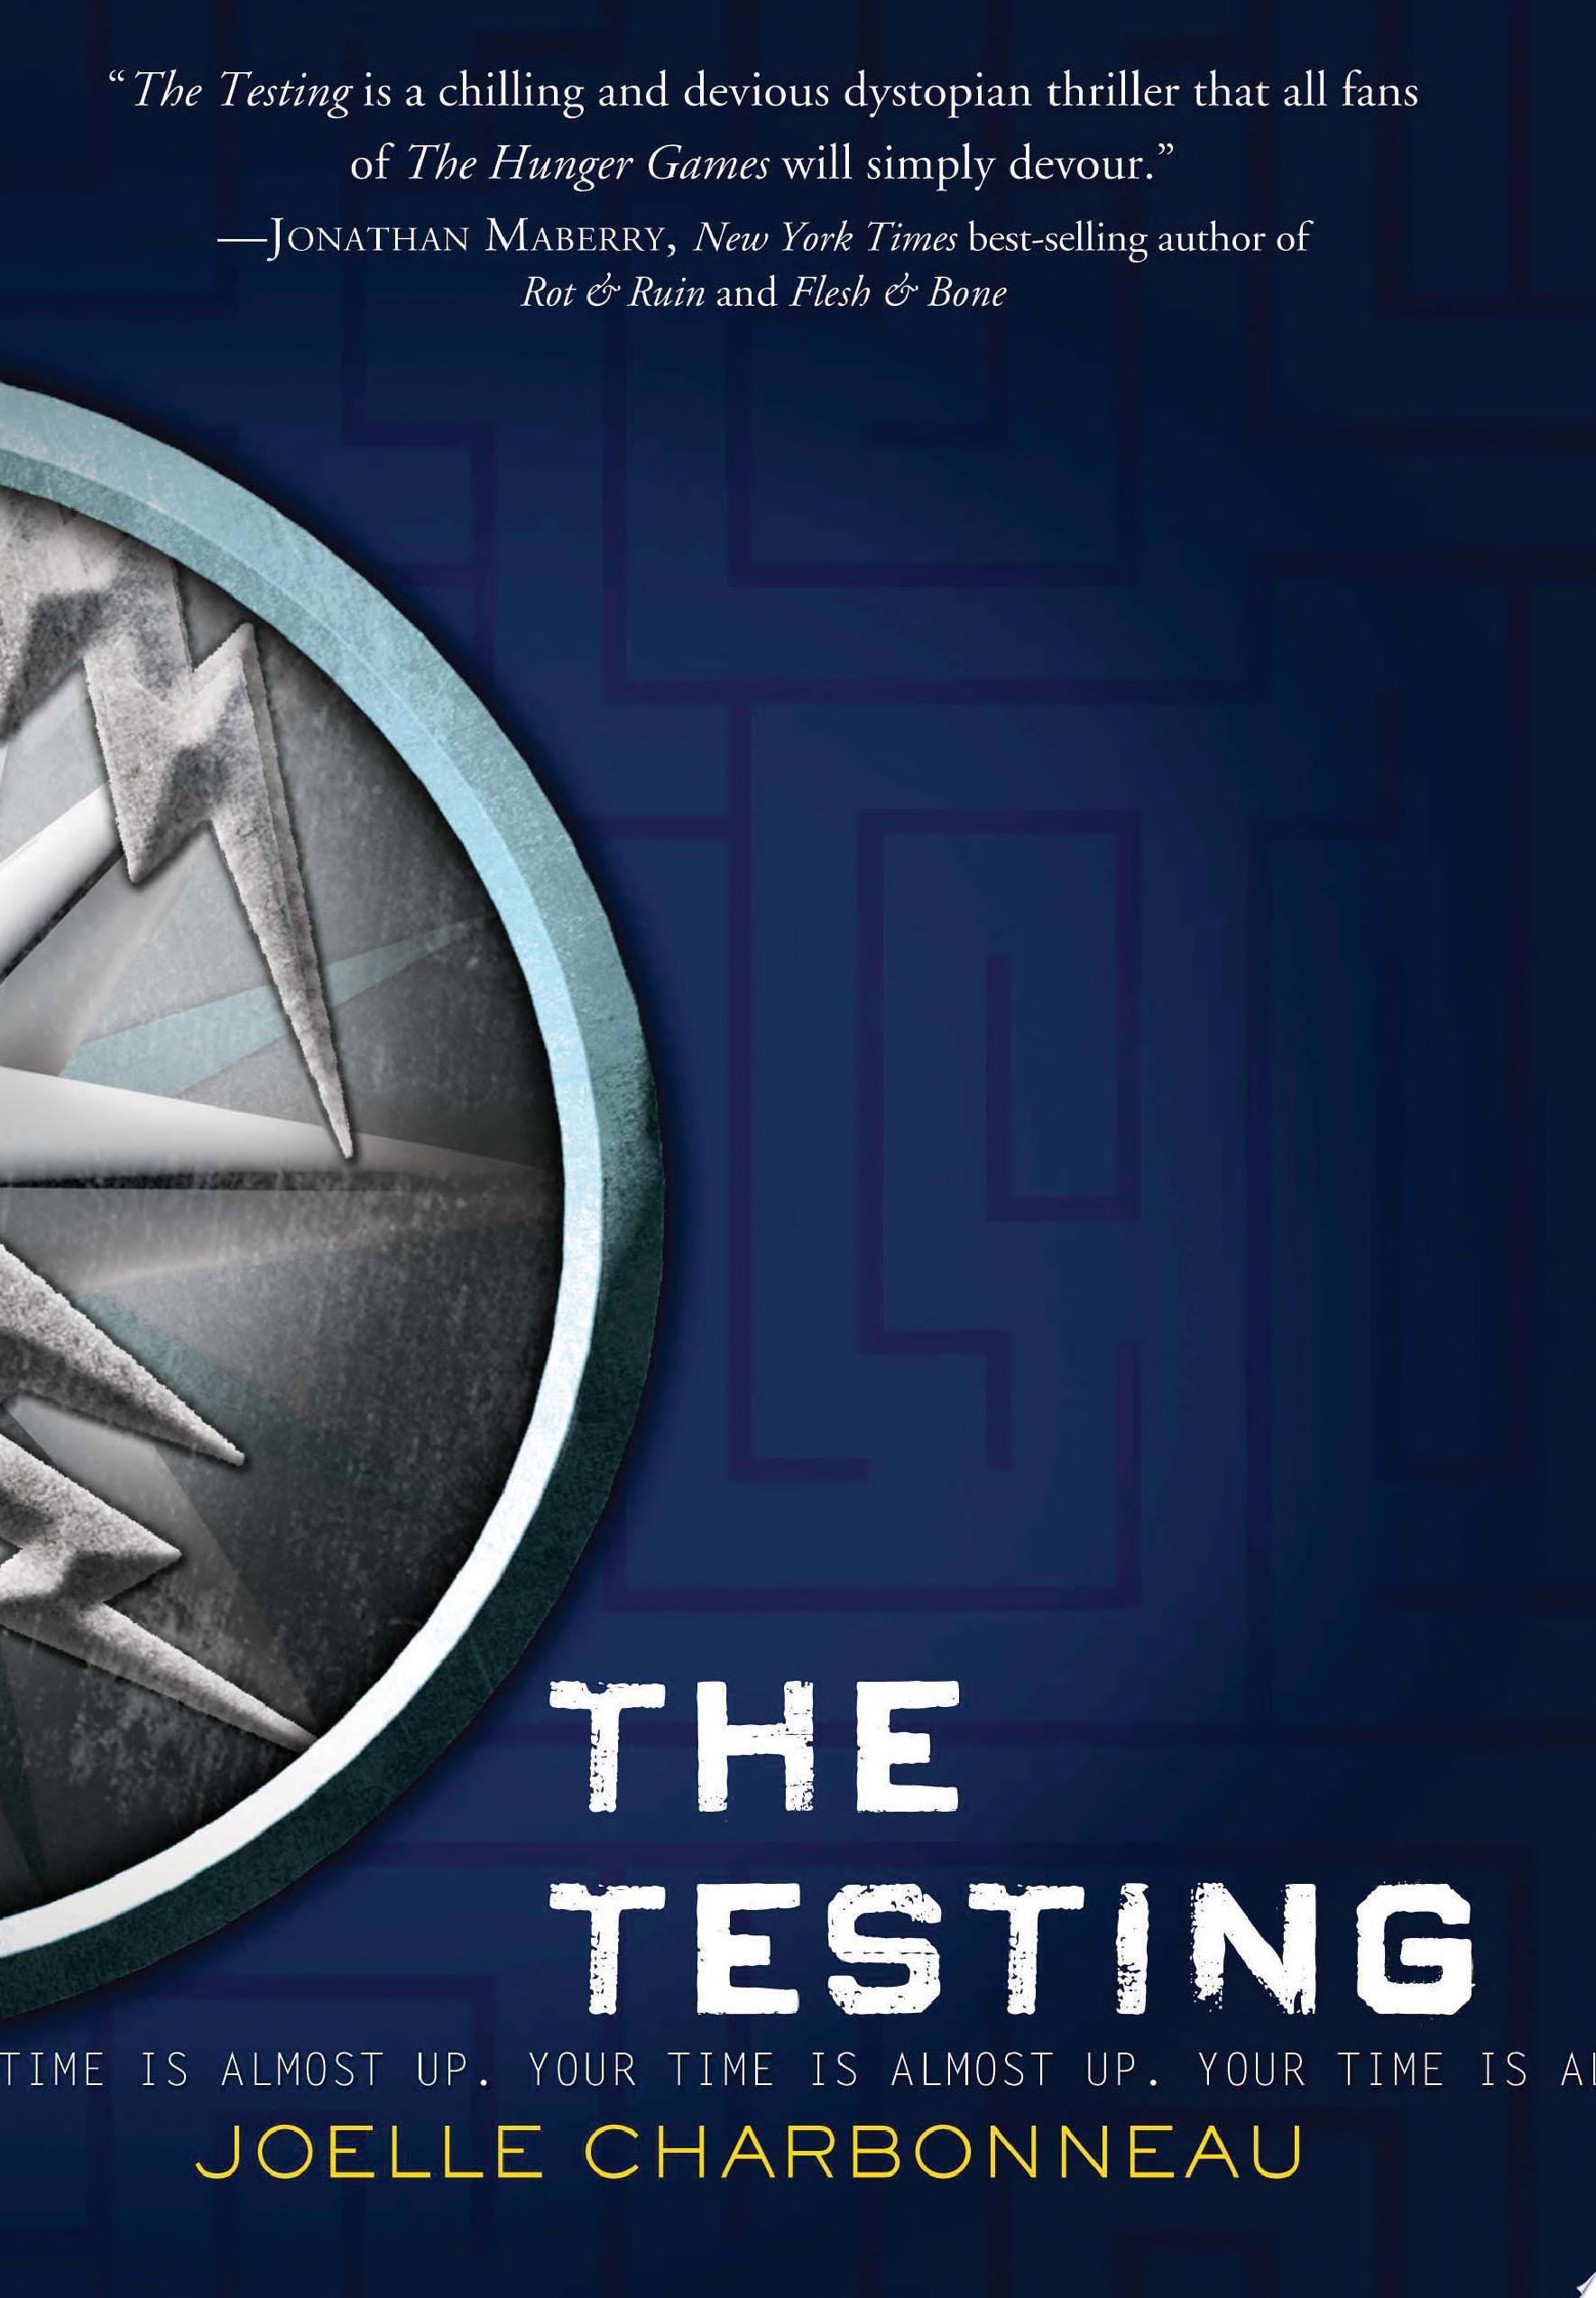 Image for "The Testing"